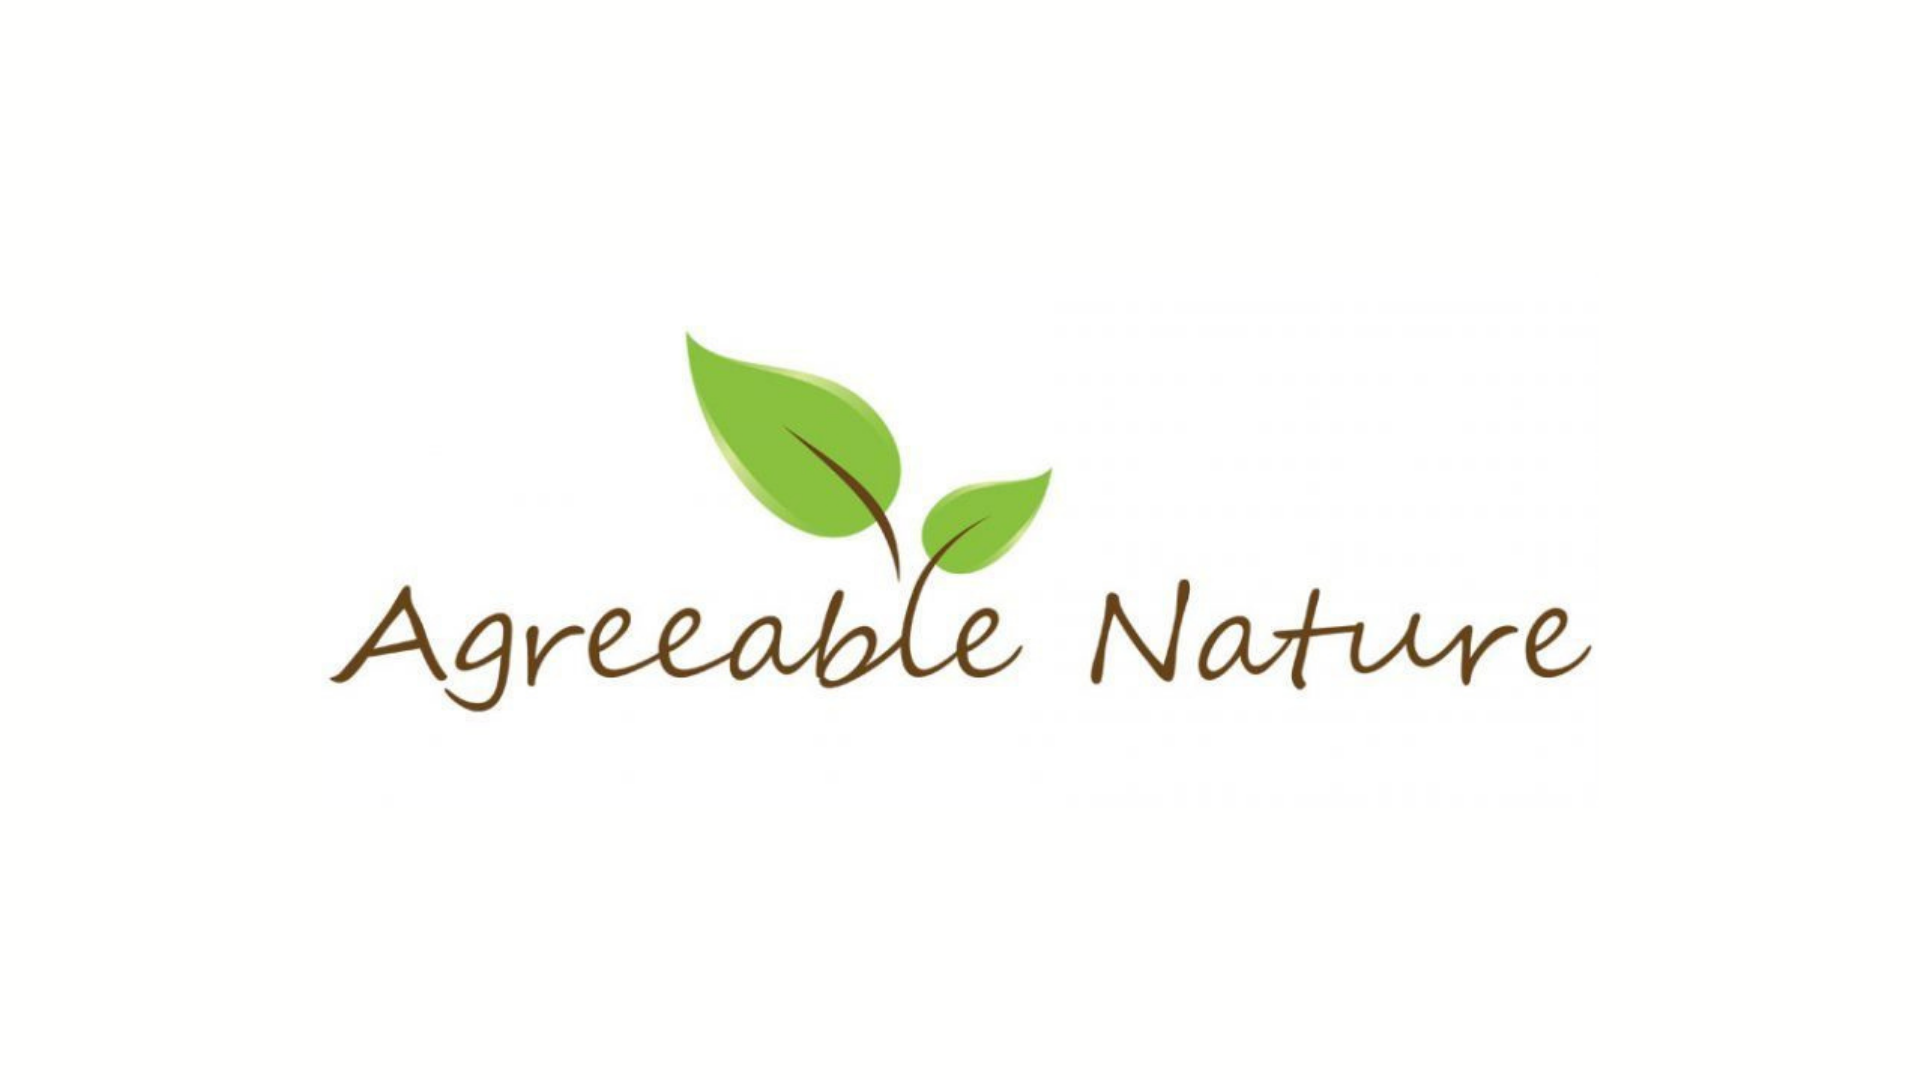 Agreeable Nature